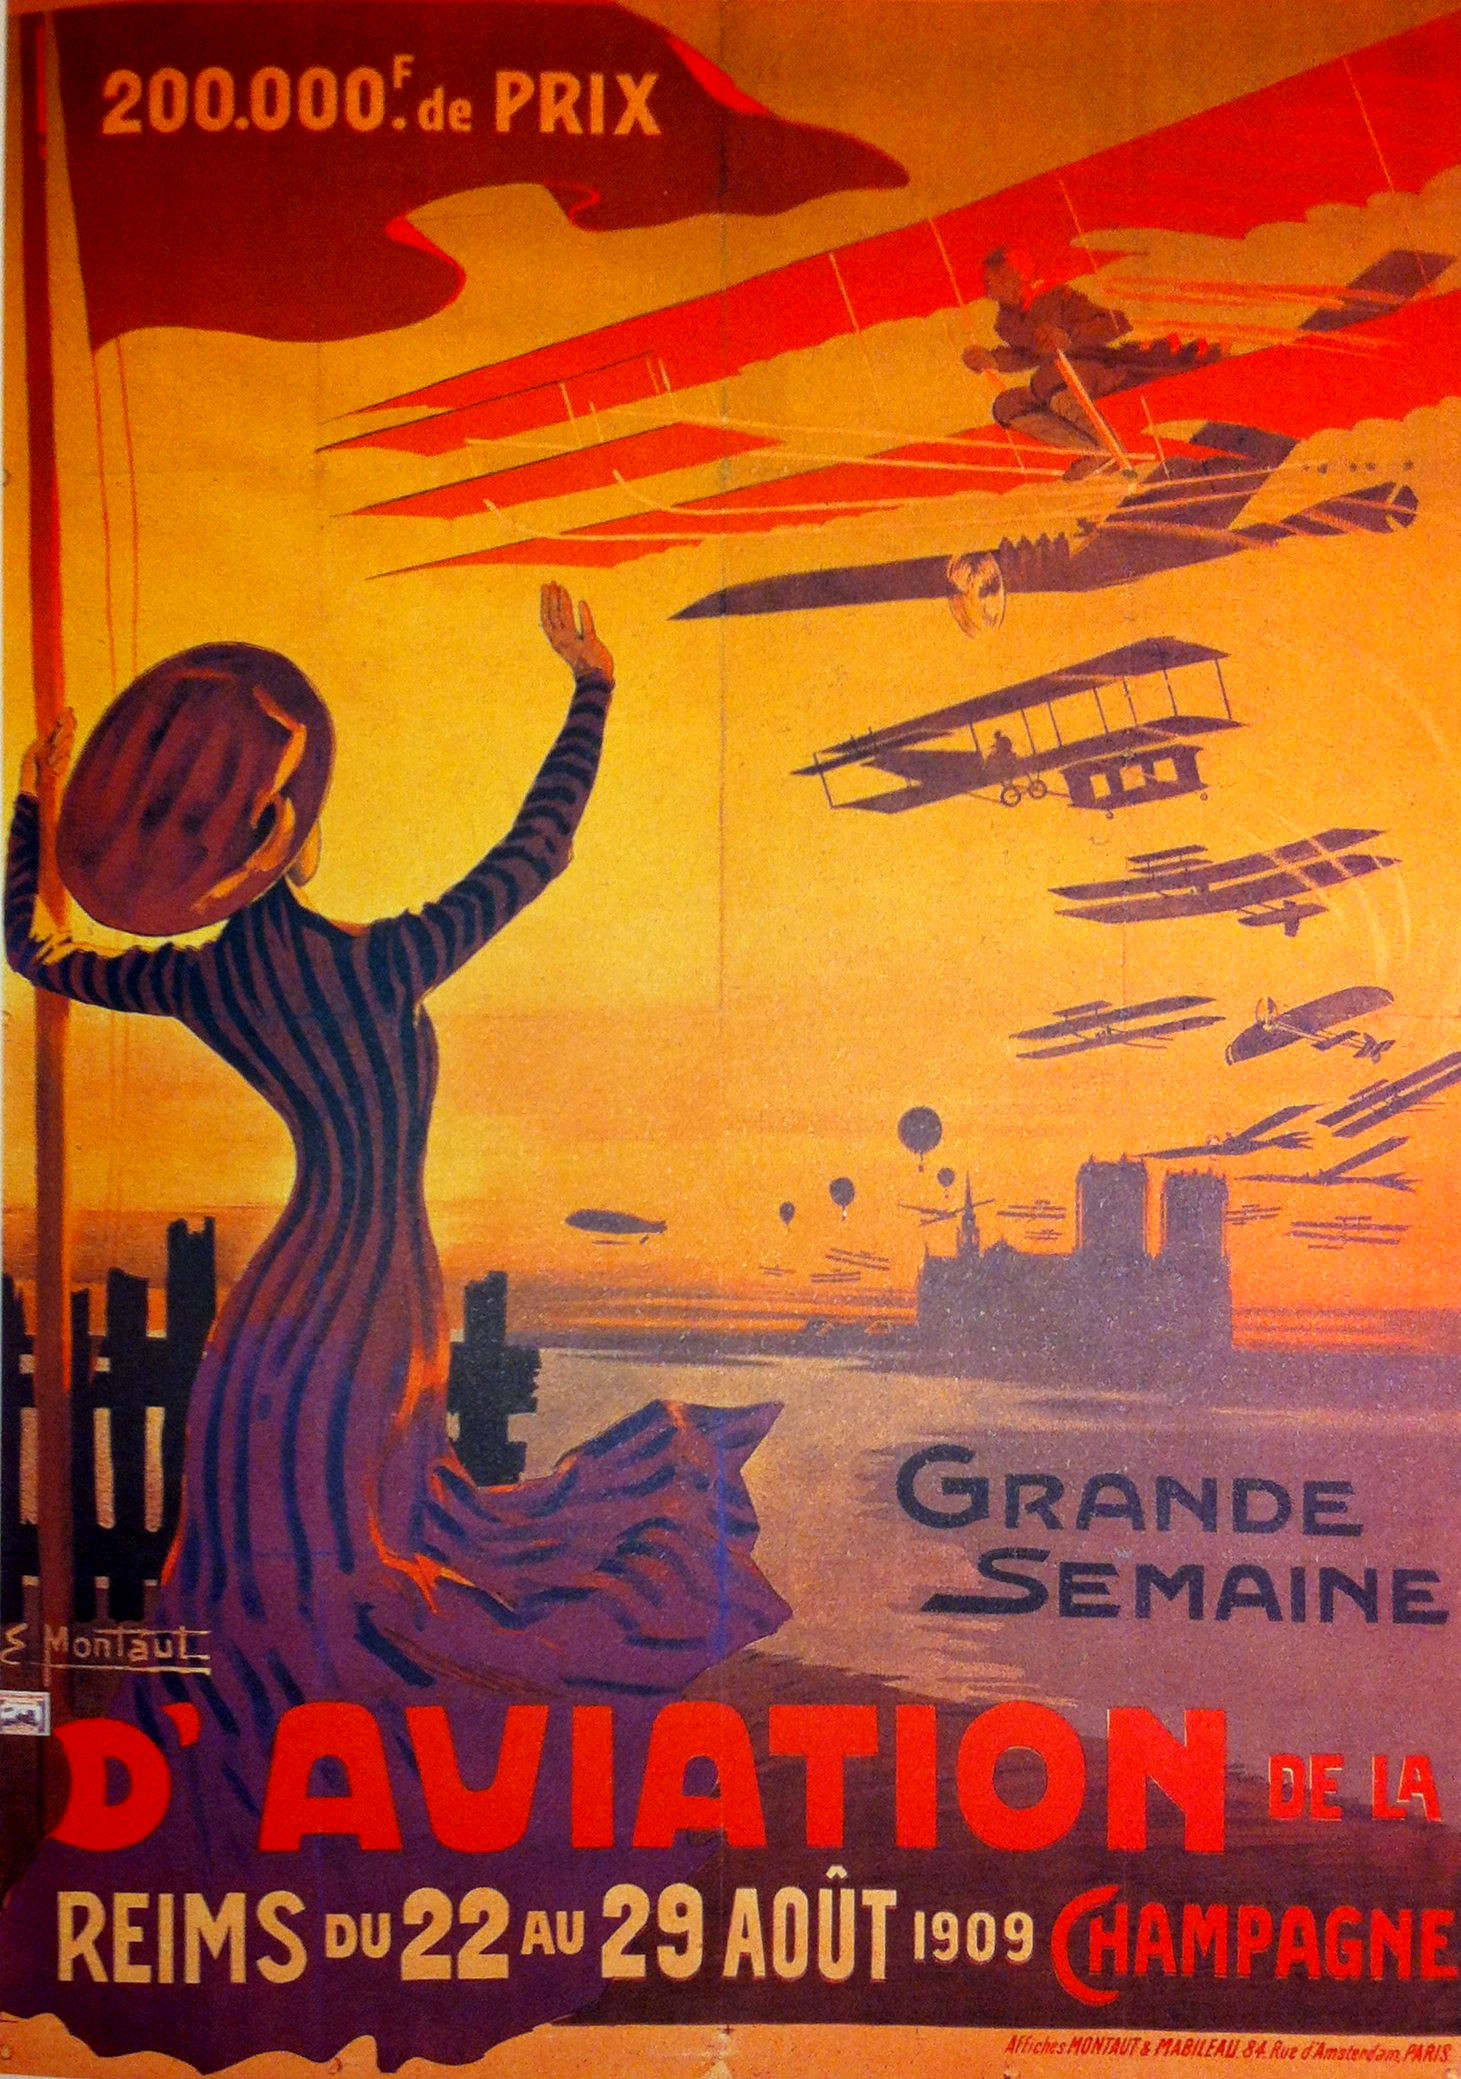 Grande Semaine Colorful poster showing woman in hat waving to planes flying overhead while text marks the dates of the upcoming Grande Semaine d'aviation in August 1909 in Champagne.